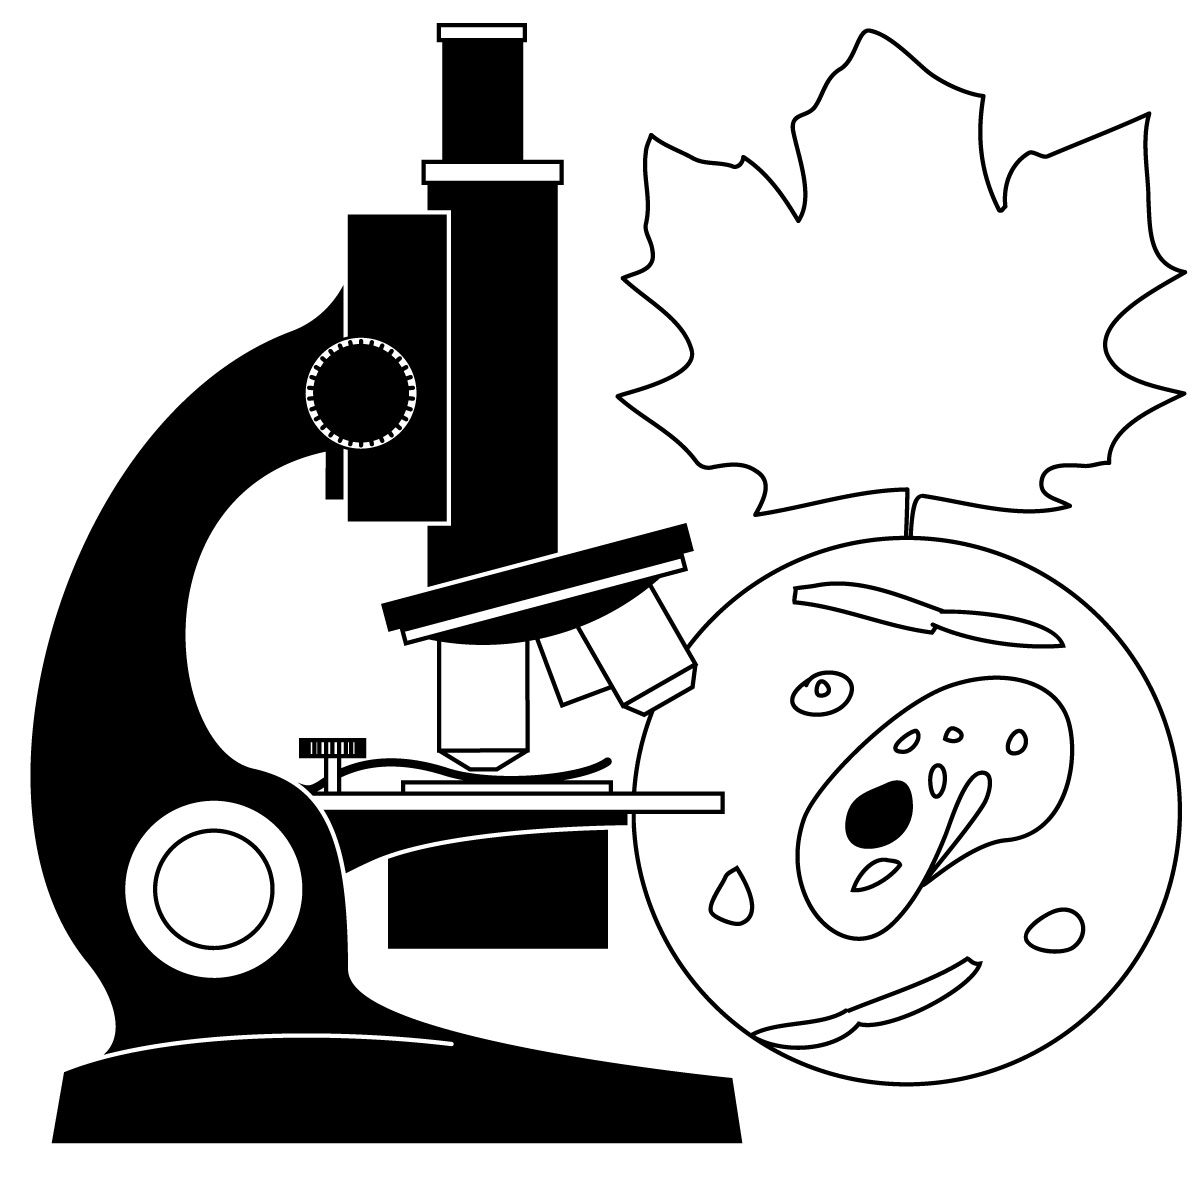 Science class clipart black and white